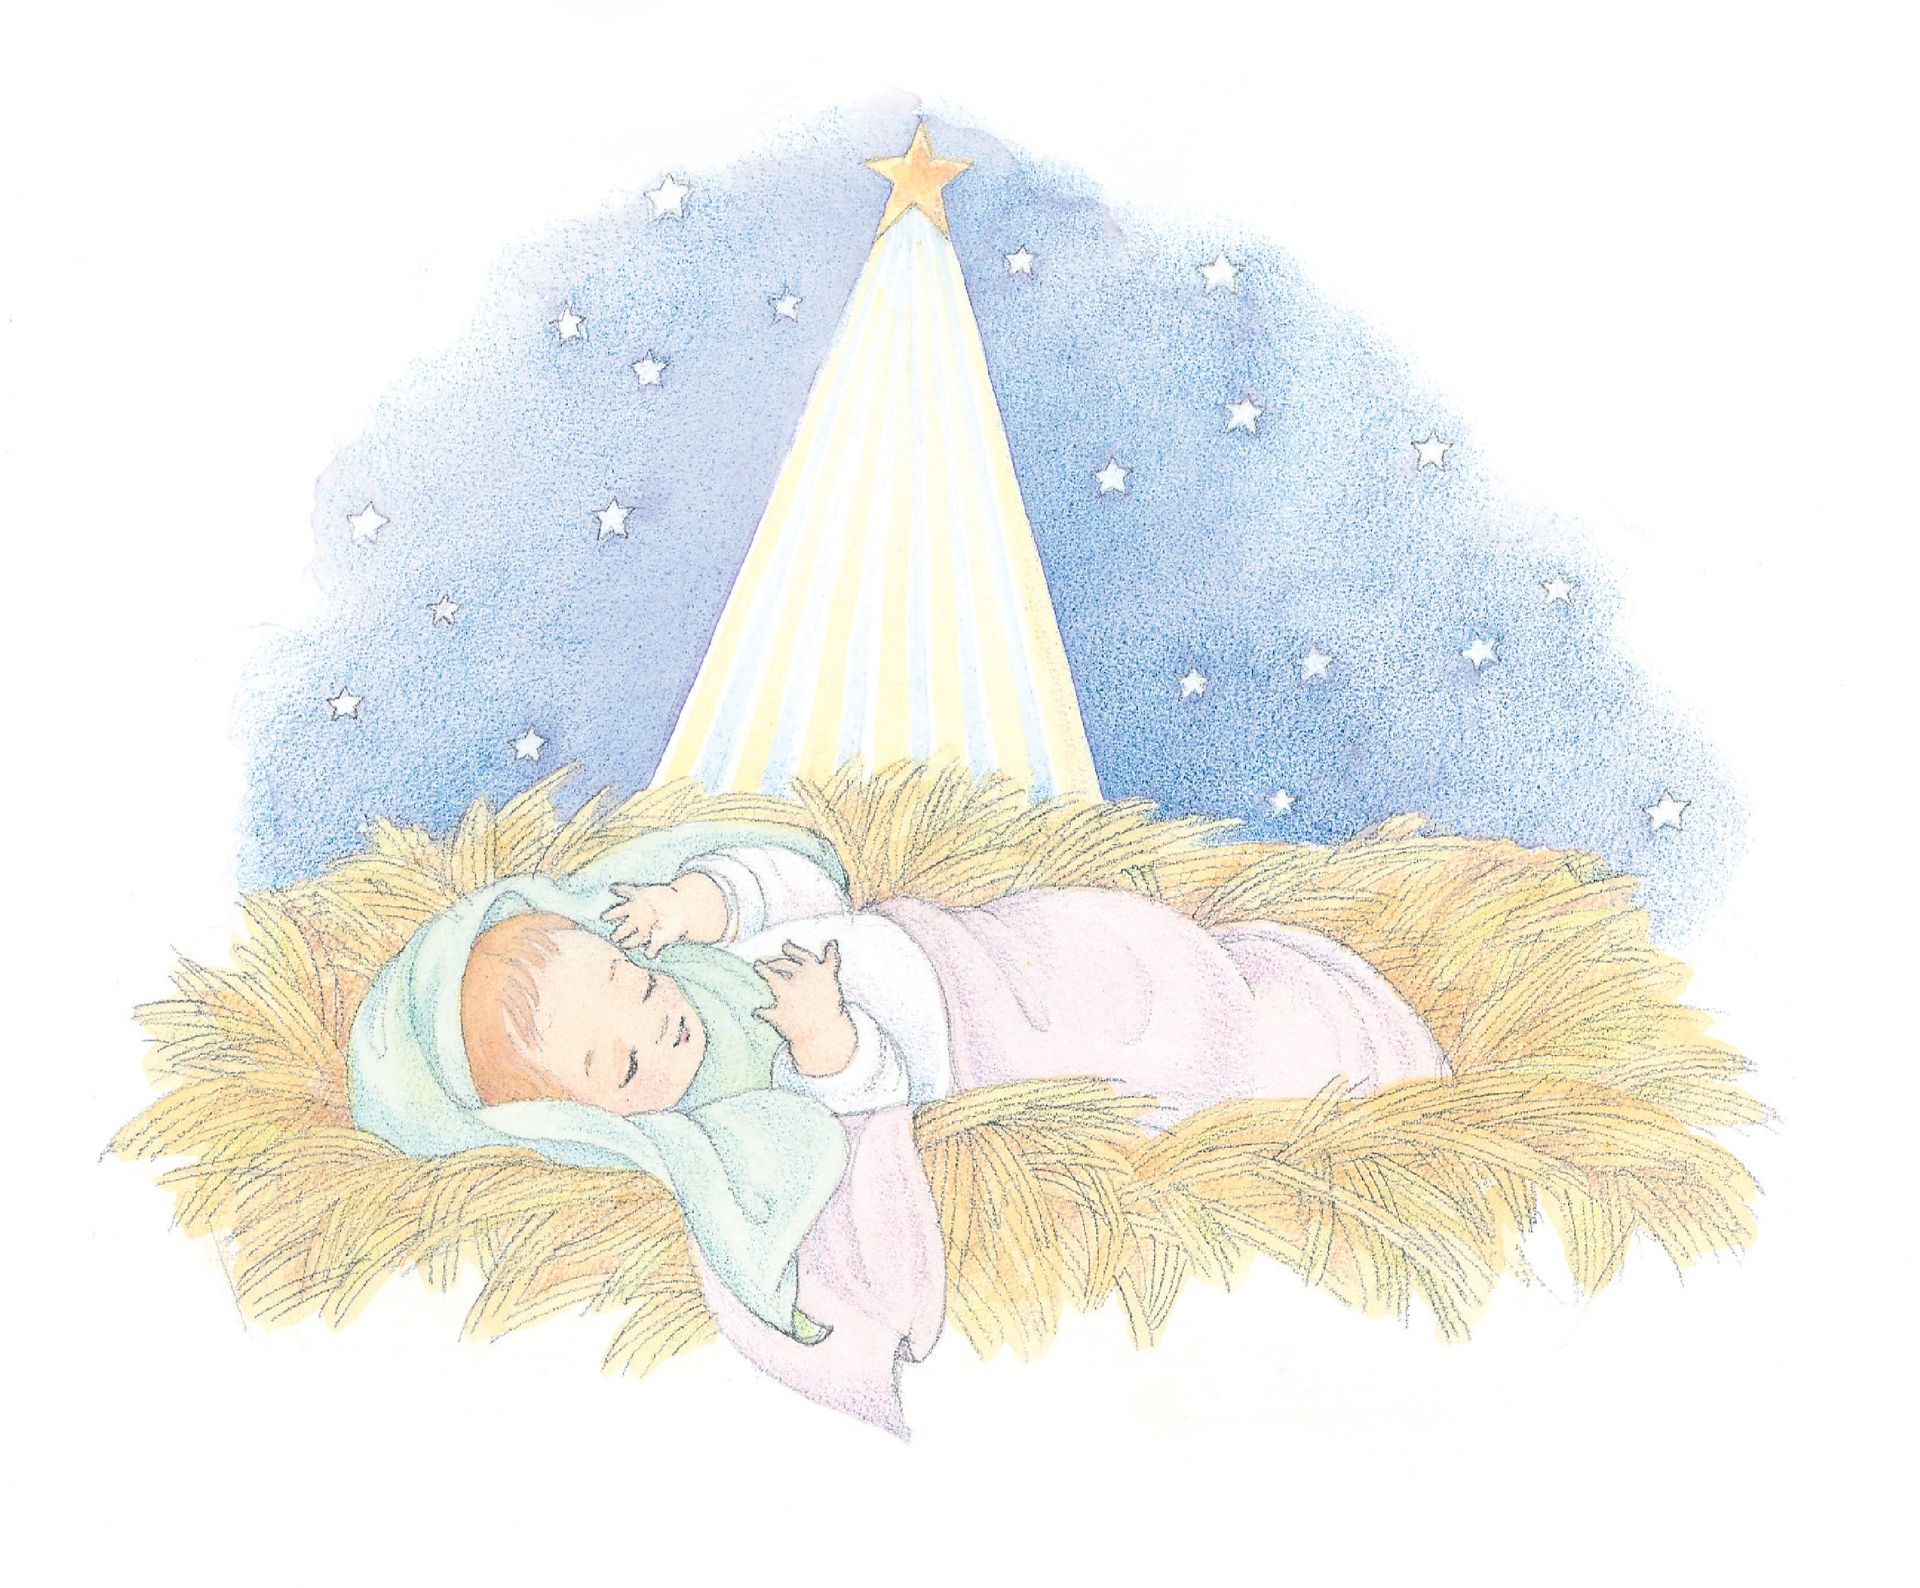 The baby Jesus asleep in a manger. From the Children’s Songbook, page 42, “Away in a Manger”; watercolor illustration by Phyllis Luch.